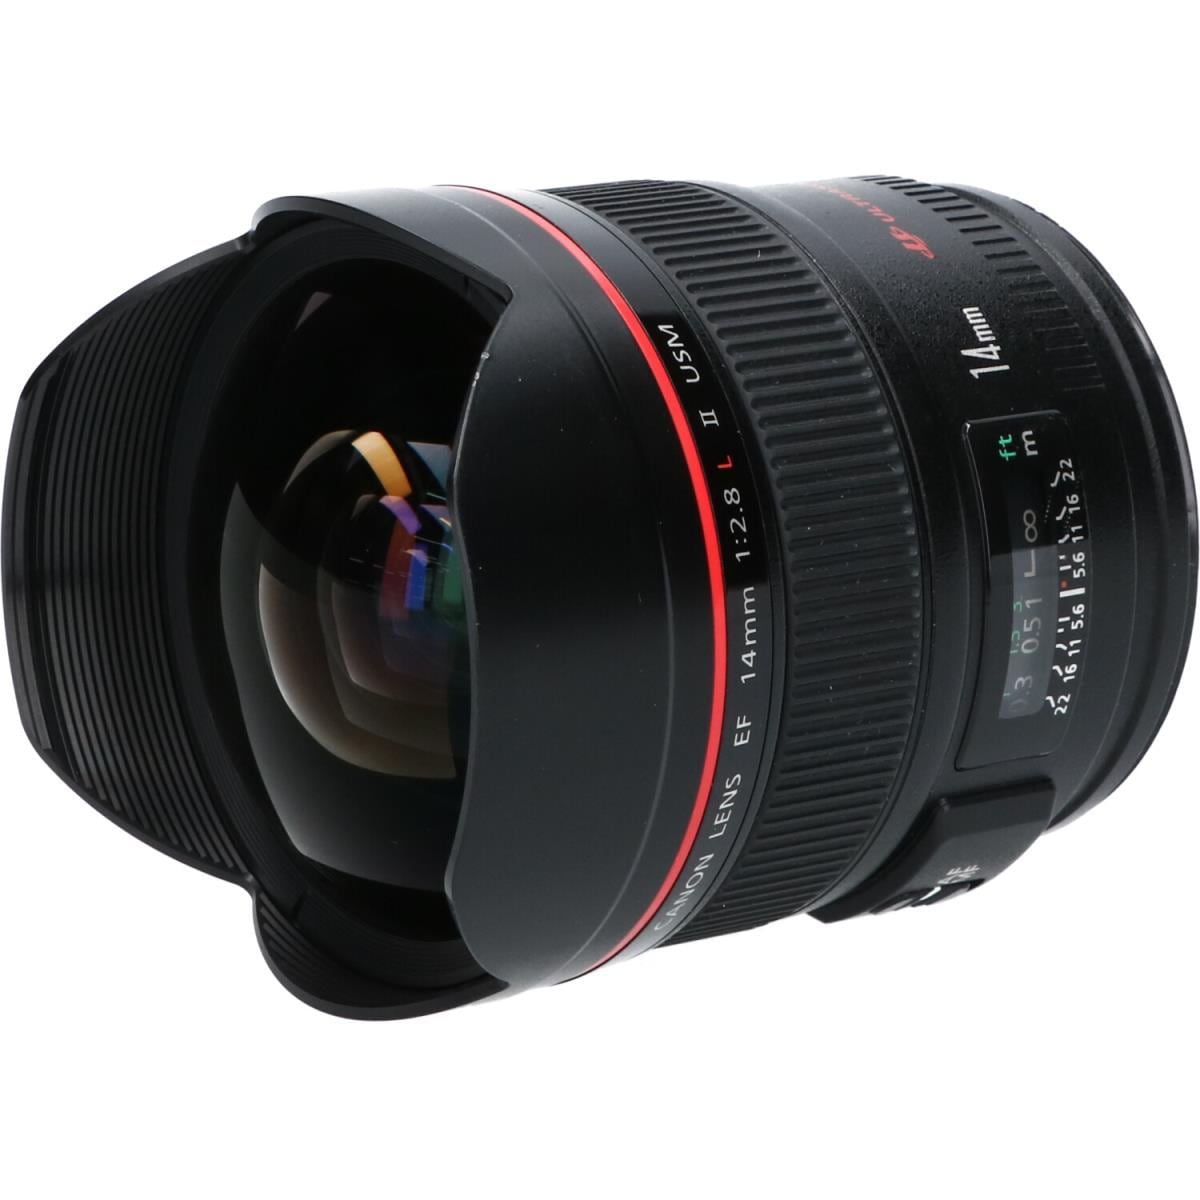 CANON EF14mm F2.8LIIUSM